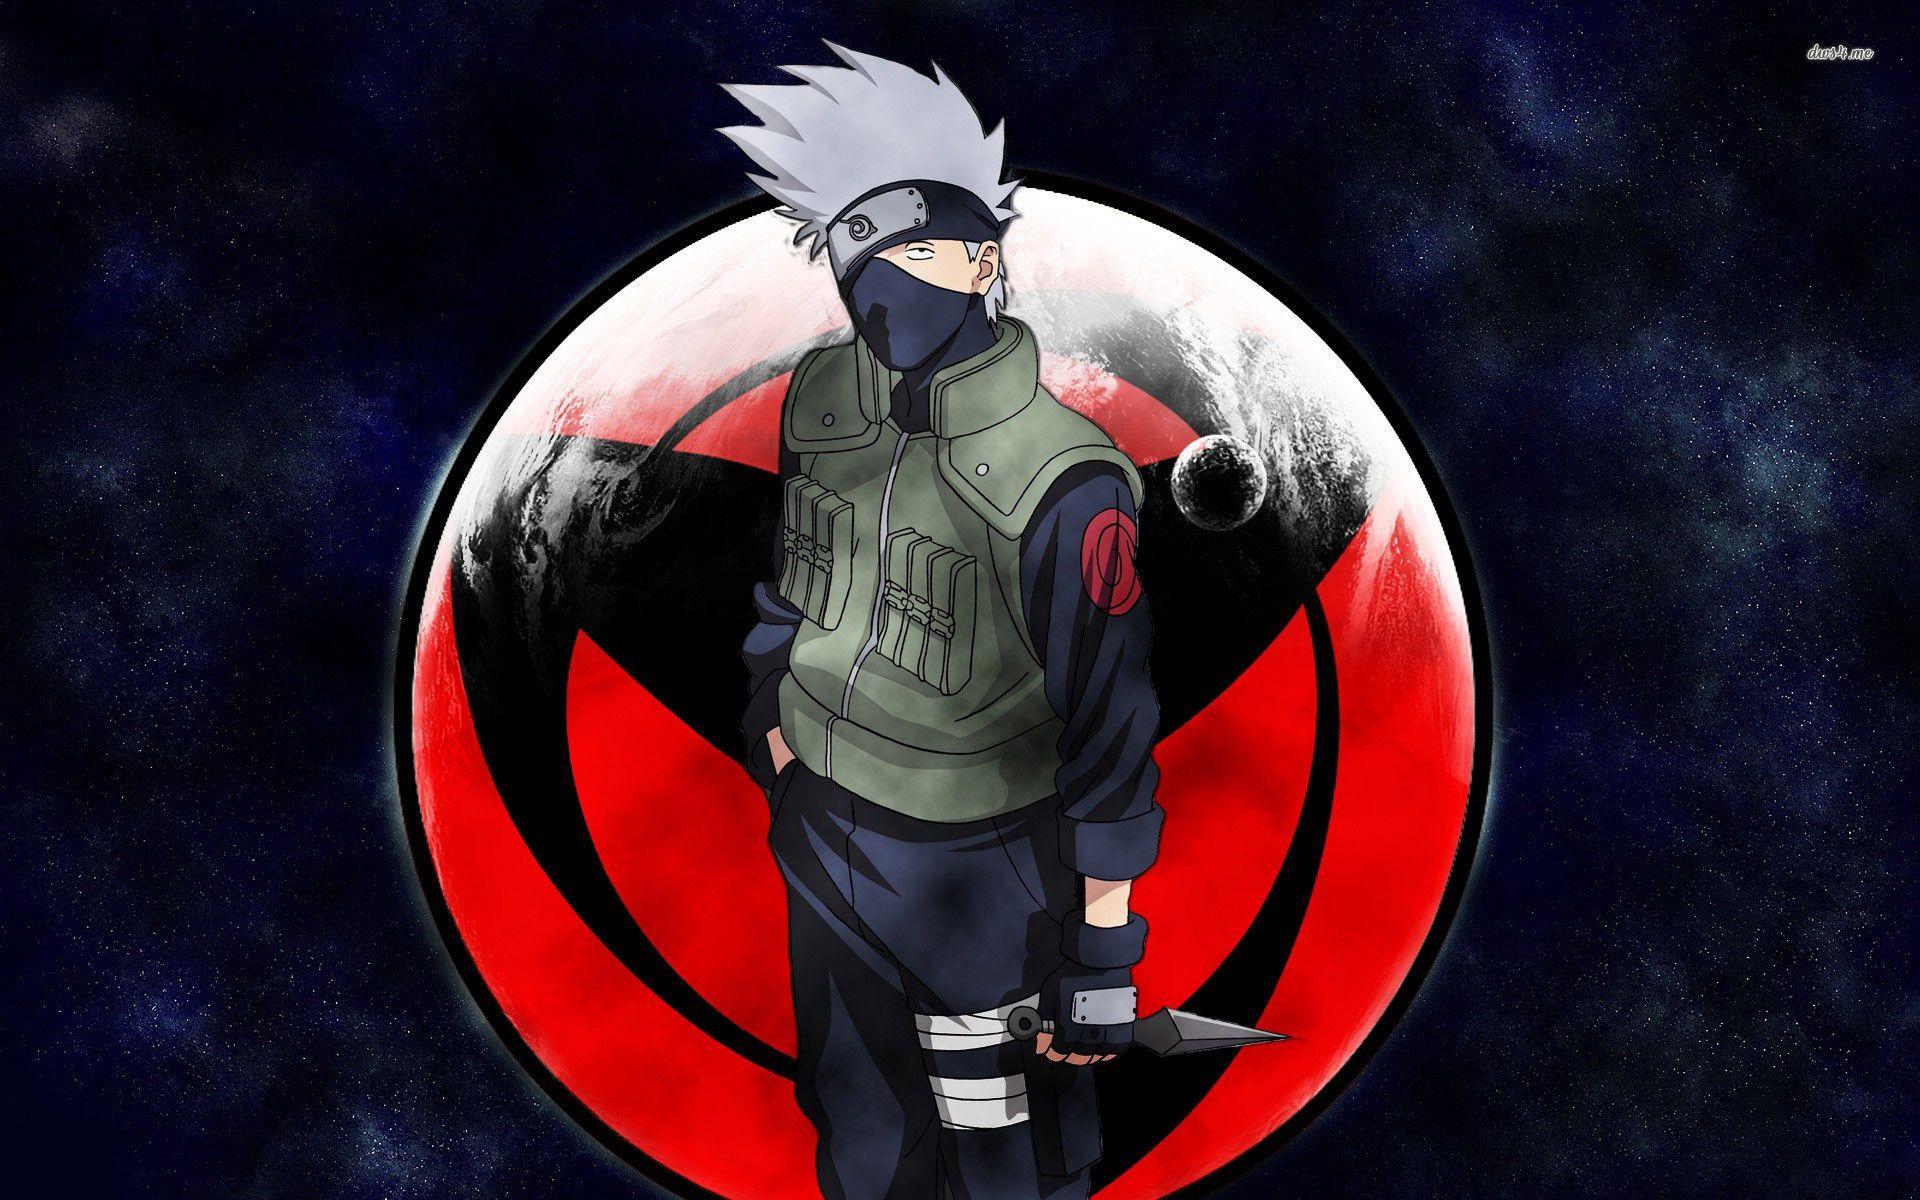 Kakashi Hatake Supreme Wallpapers Top Free Kakashi Hatake Supreme Backgrounds Wallpaperaccess If you're looking for the best kakashi wallpaper hd then wallpapertag is the place to be. kakashi hatake supreme wallpapers top